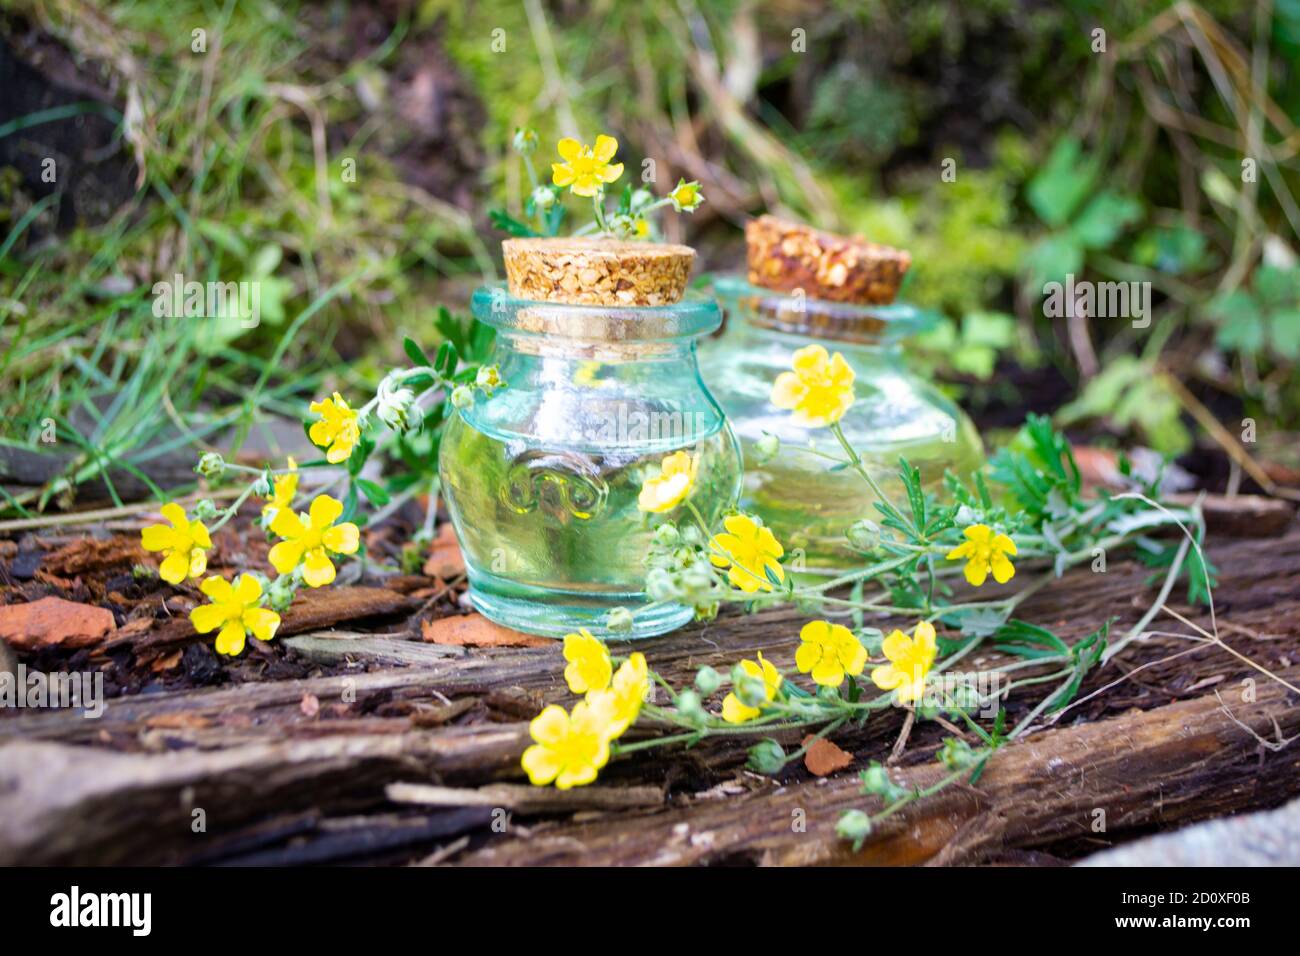 Bottles of healing plants treatment and healthy herbs Ranunculus acris in nature Stock Photo